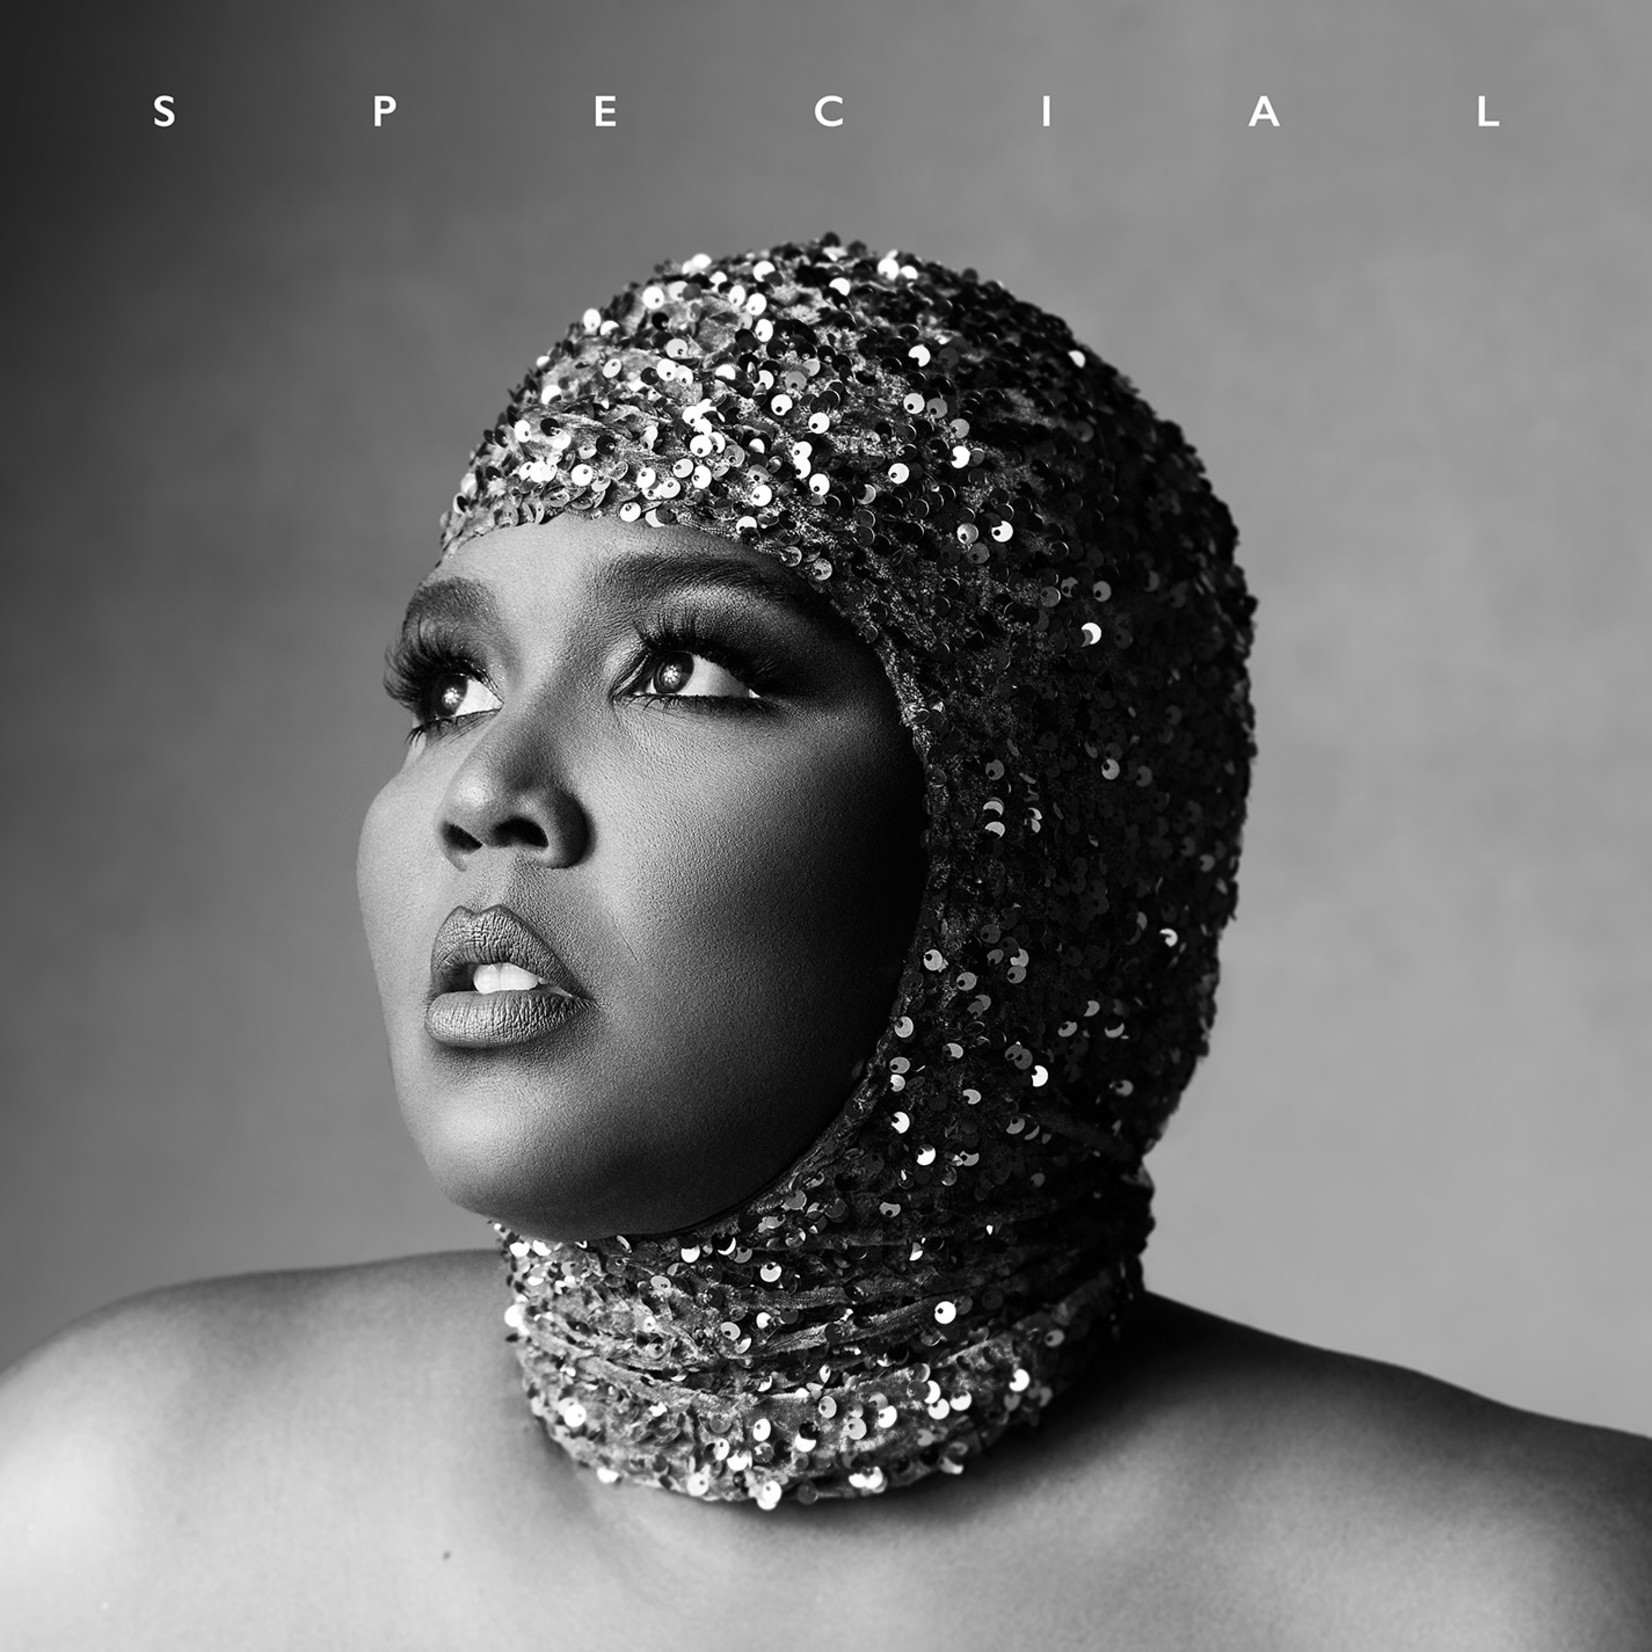 [New] Lizzo - Special